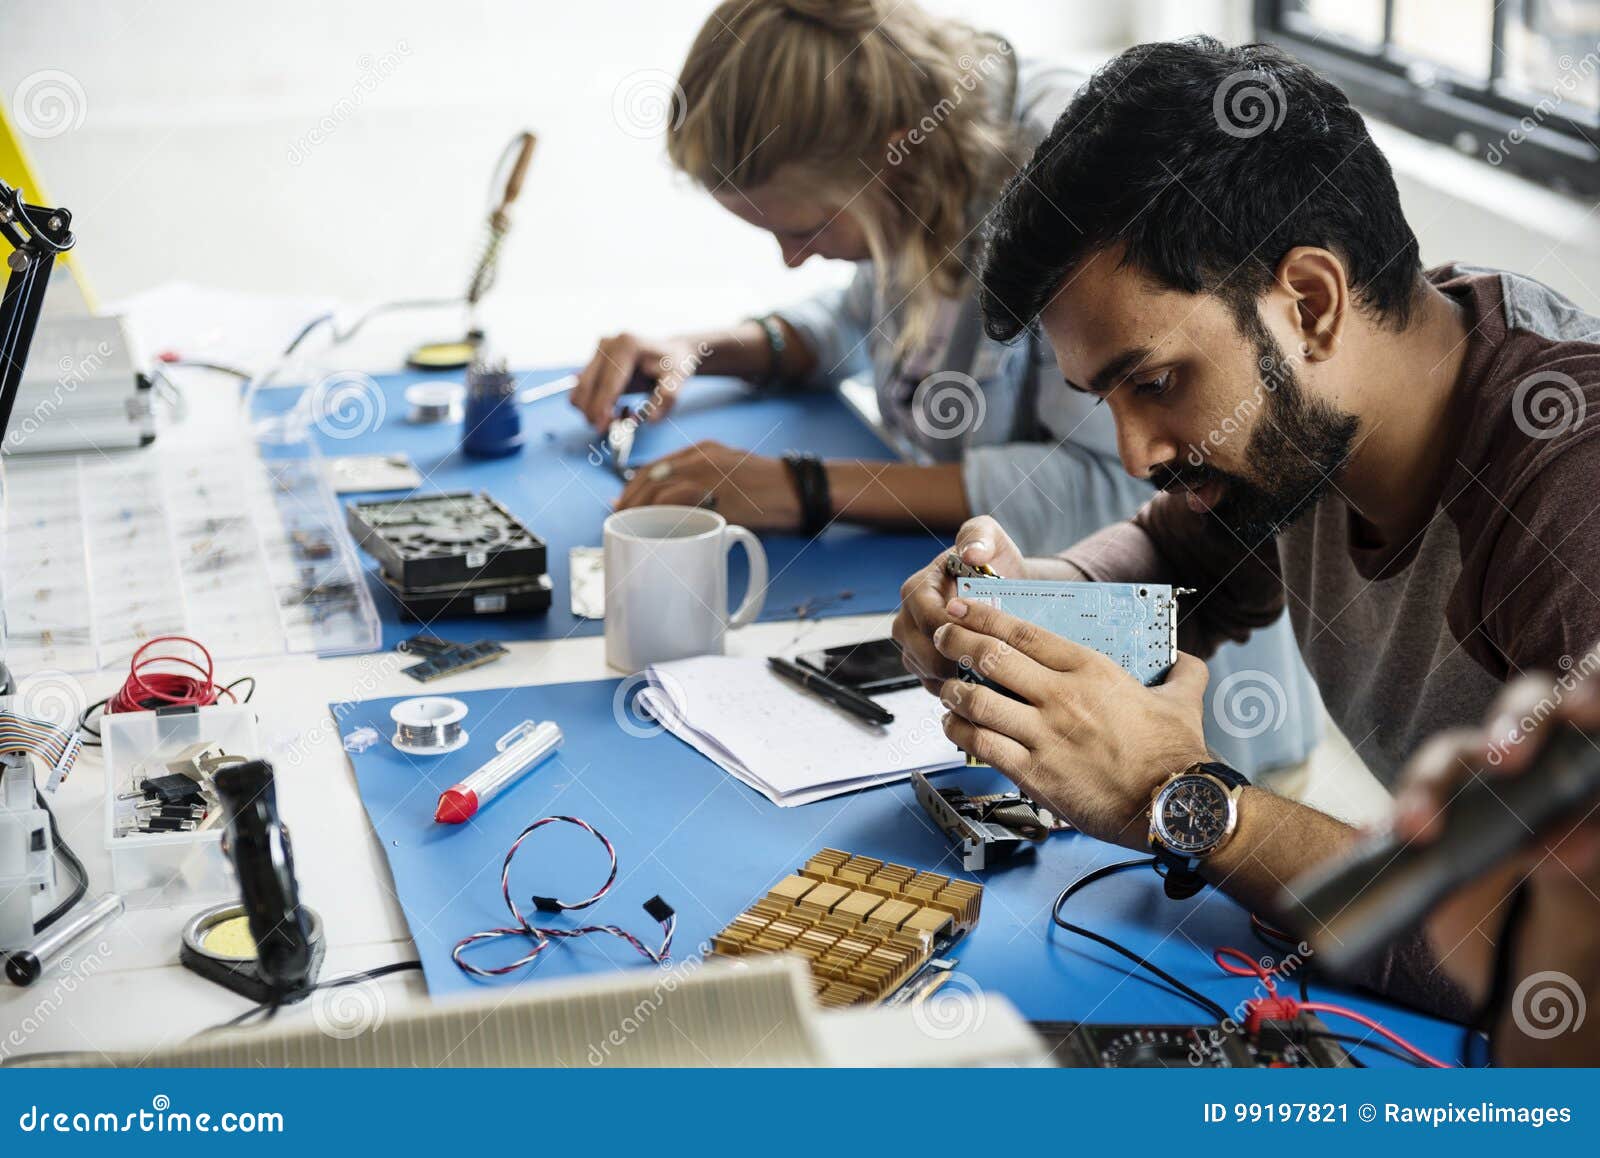 electronics technicians team working on computer parts